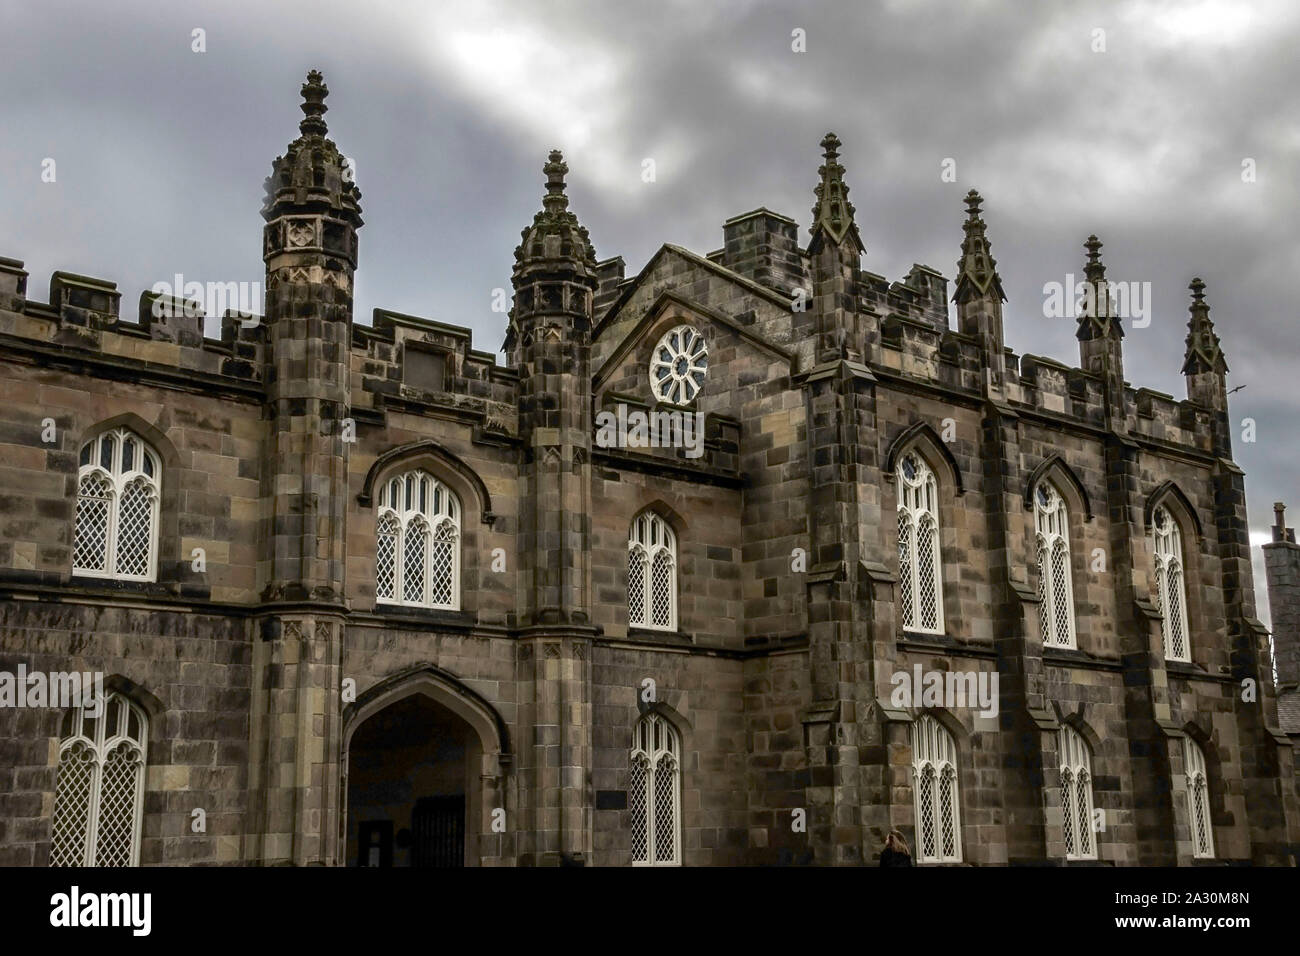 King's College in Old Aberdeen, Scotland. The University and King's College of Aberdeen. Stock Photo